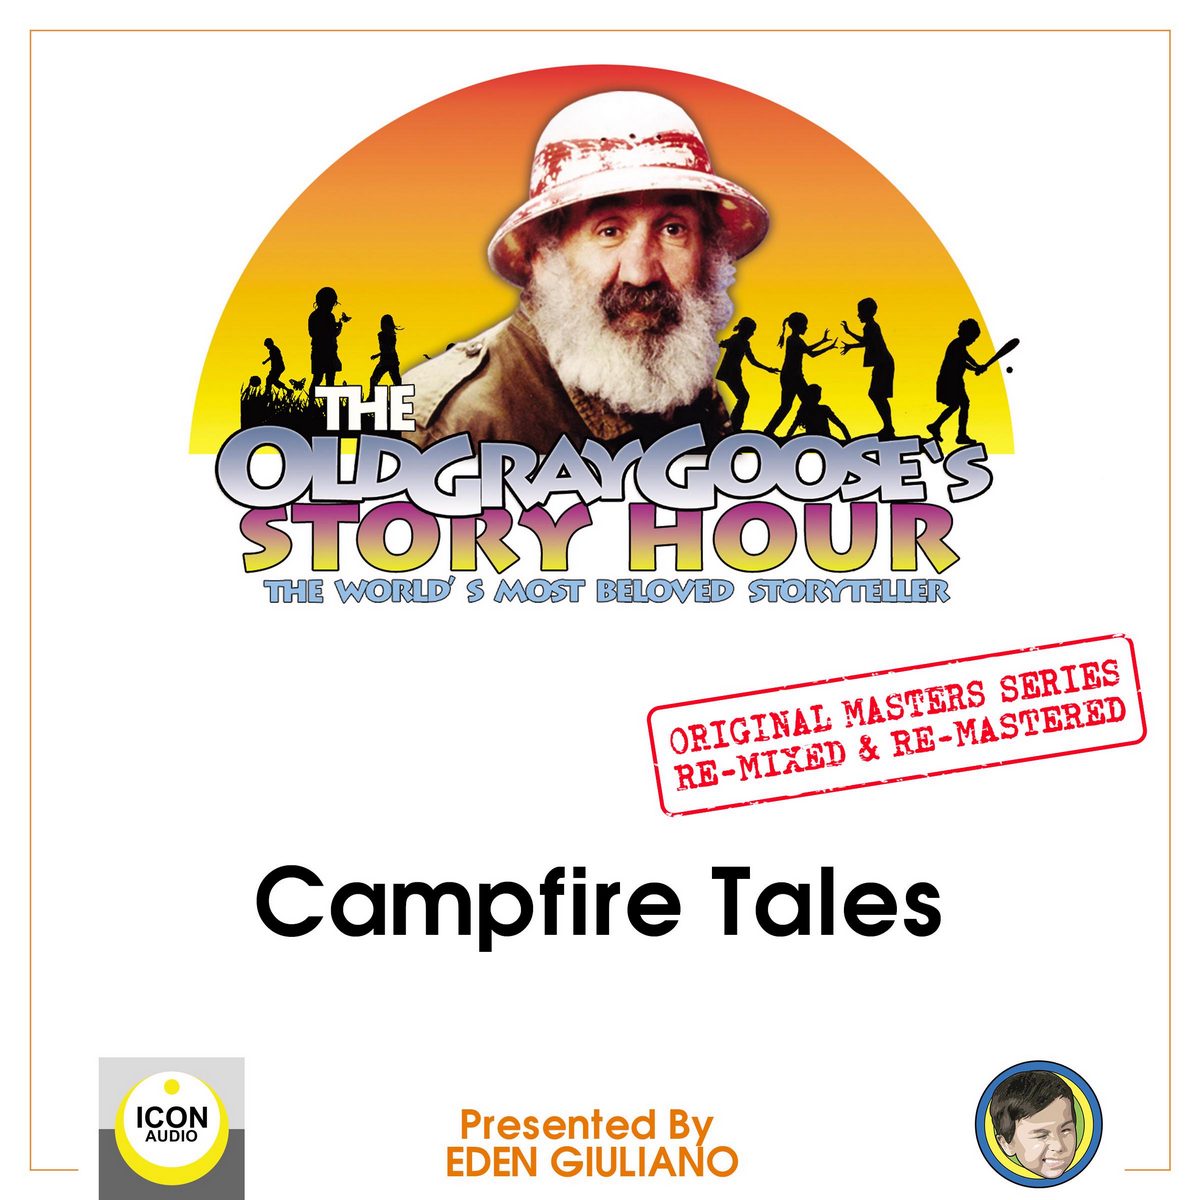 The Old Gray Goose’s Story Hour; The World’s Most Beloved Storyteller; Original Masters Series Re-mixed and Re-mastered; Campfire Tales